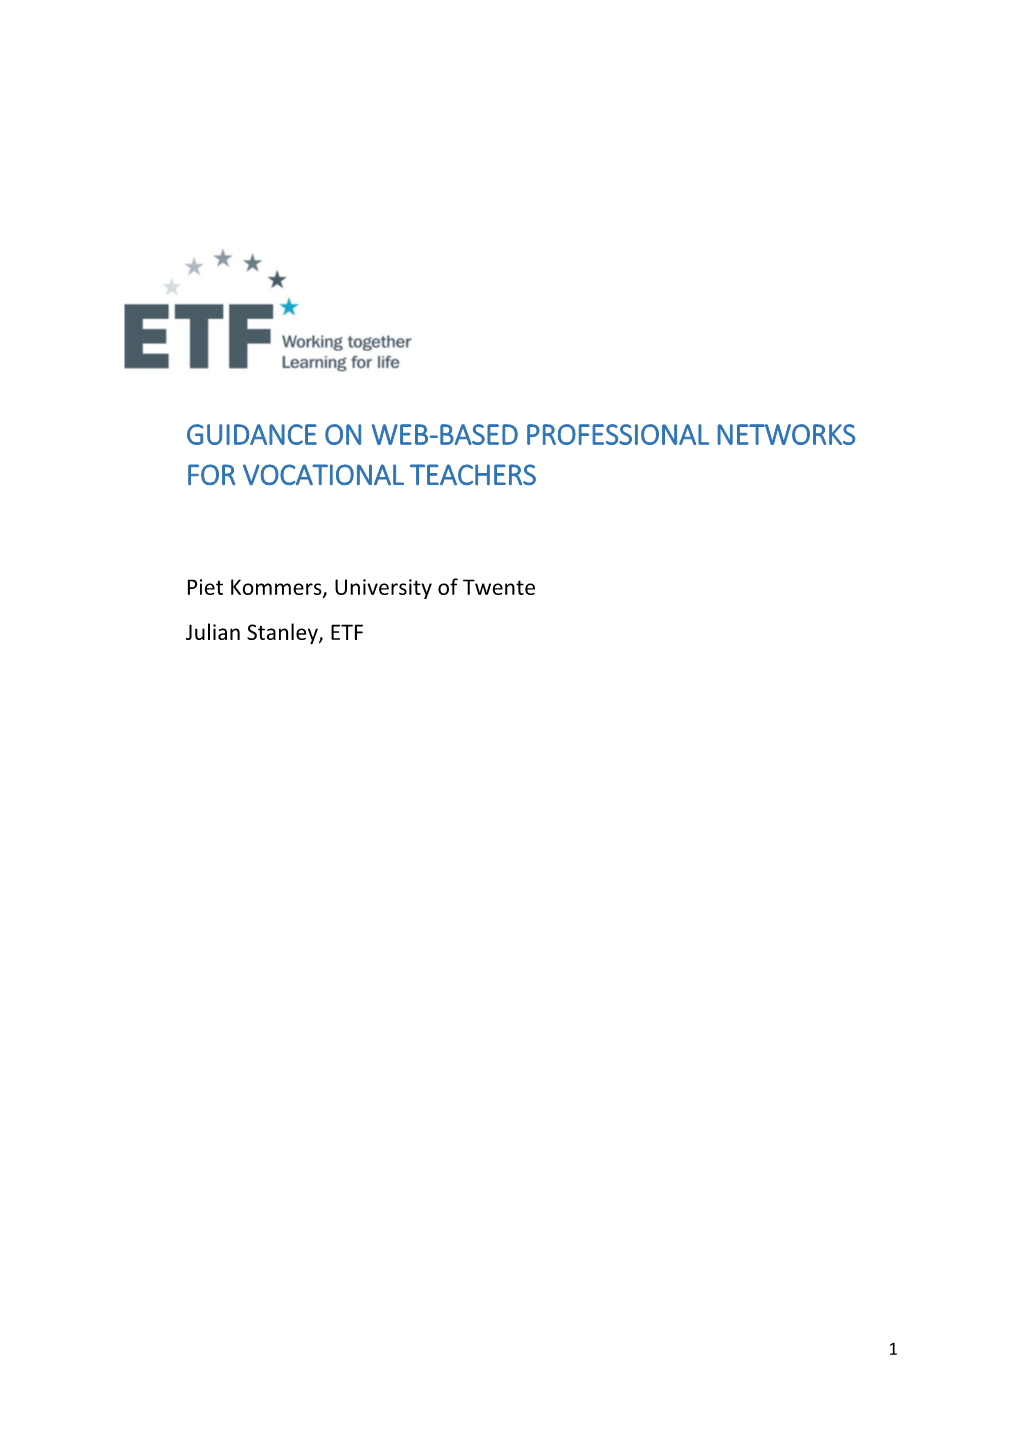 Guidance Onweb-Based Professional Networks for Vocational Teachers